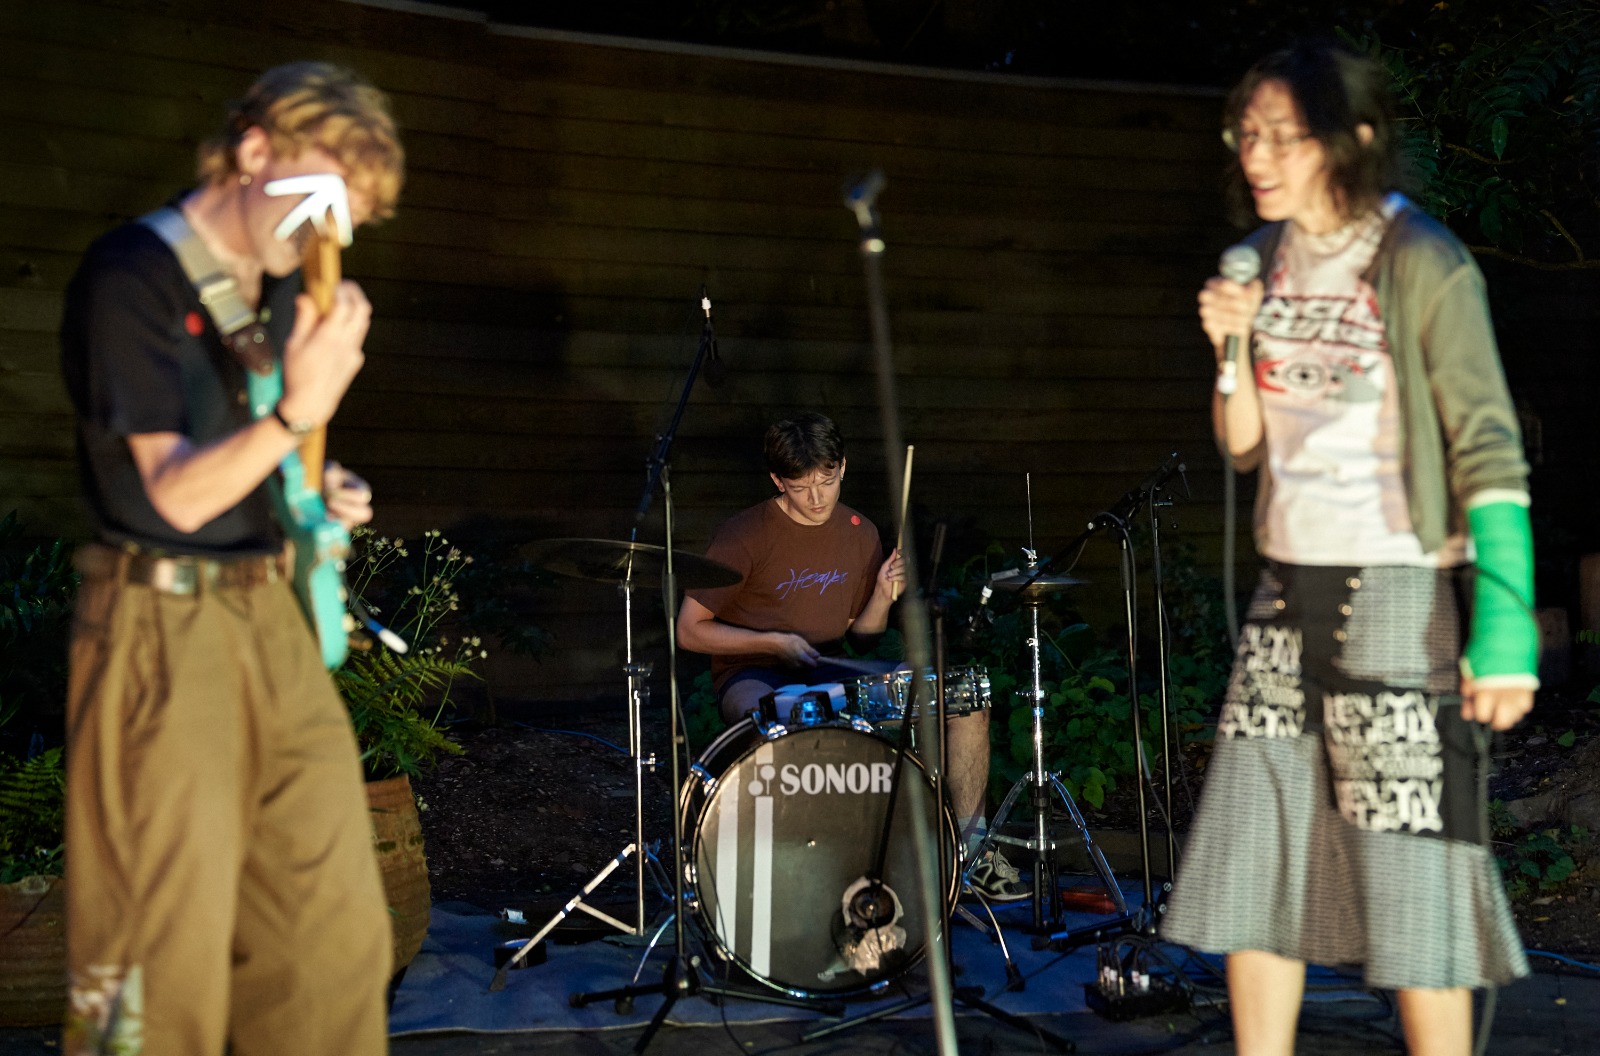 Three band members outside playing music in the dark